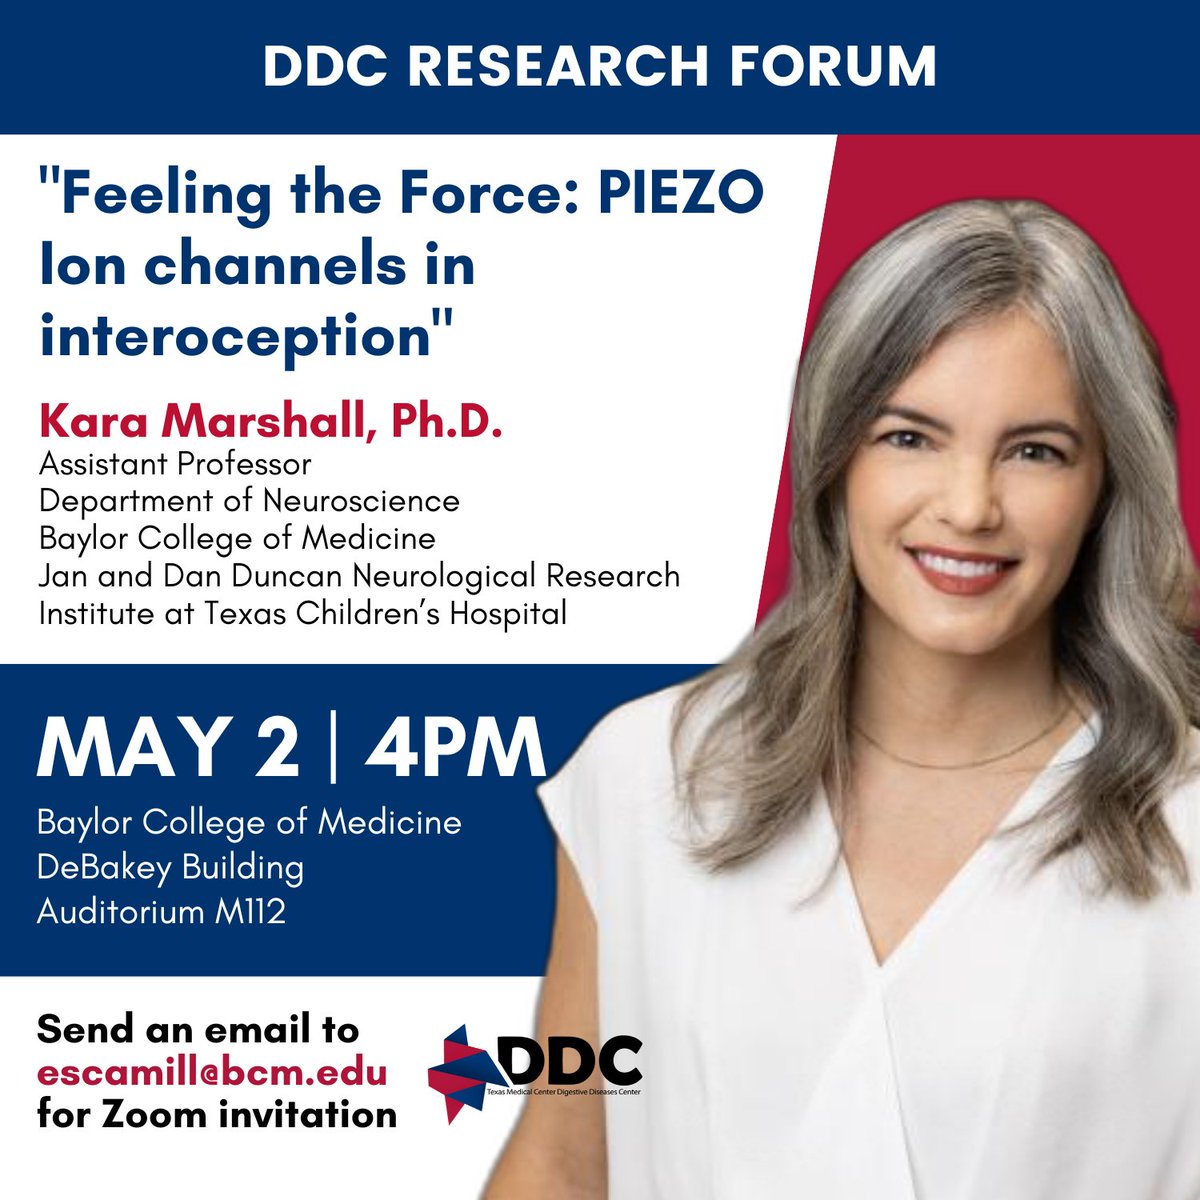 This week's #TMC #DDC #giresearch Forum features Dr. @KaraLMarshall, Assistant Professor from the @bcm_neurosci and NRI @TexasChildrens! She'll discuss #PIEZO ion channels and their response to mechanical force stimuli, bridging #neuroscience, #physiology, and cell biology🧠